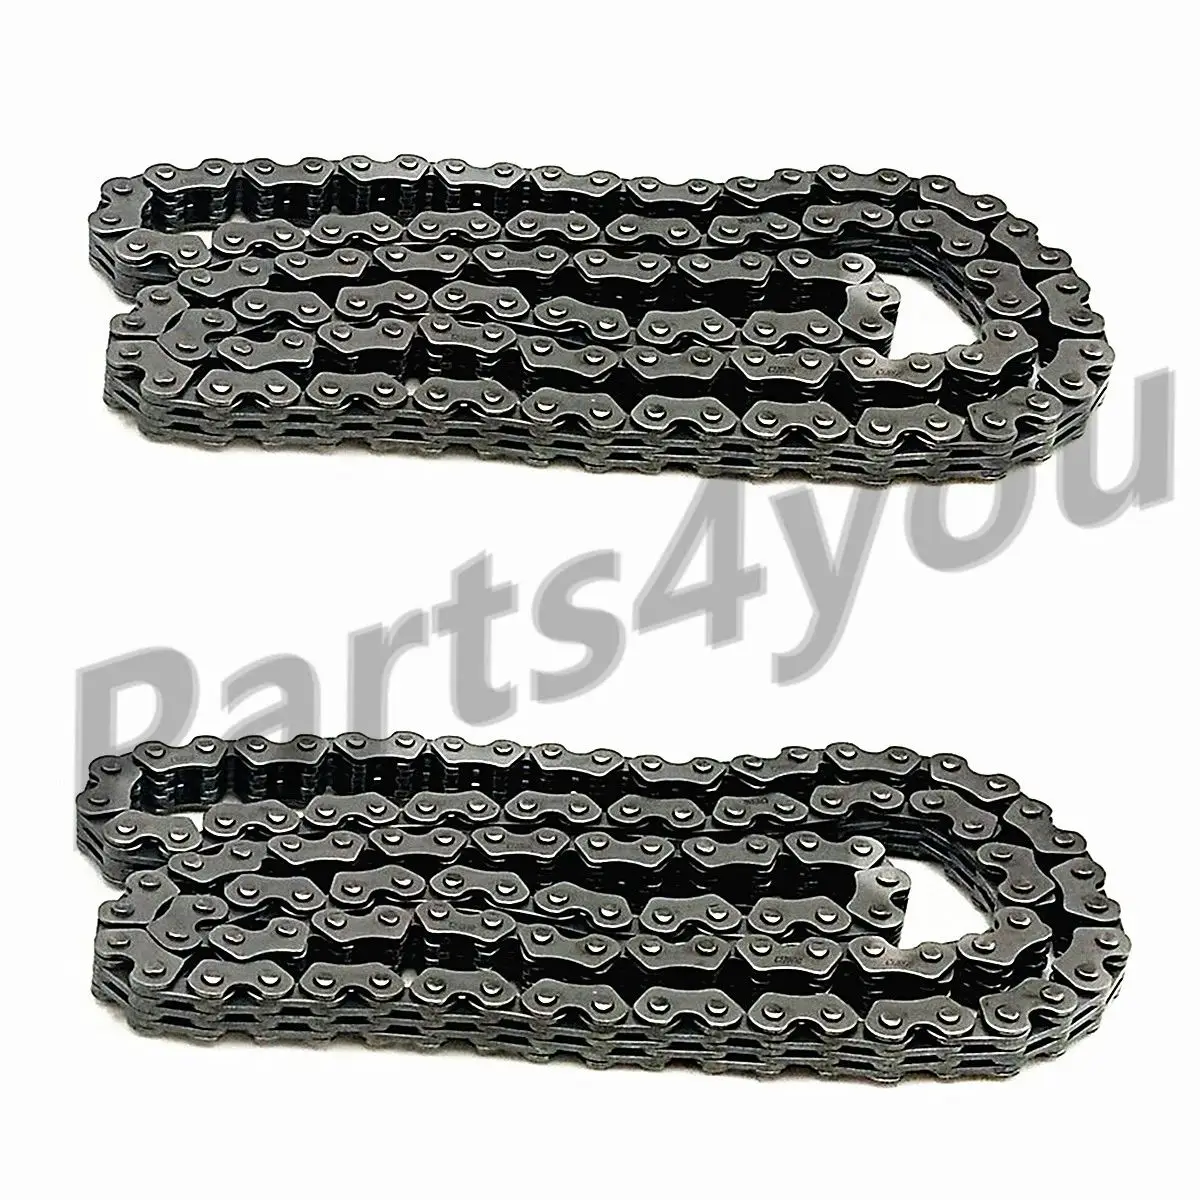 Silent Chain Timing Chain for CAN-AM BRP G1 G2 Outlander Renegade Maverick Commander 330 400 450 500 570 650 800 850 420297060